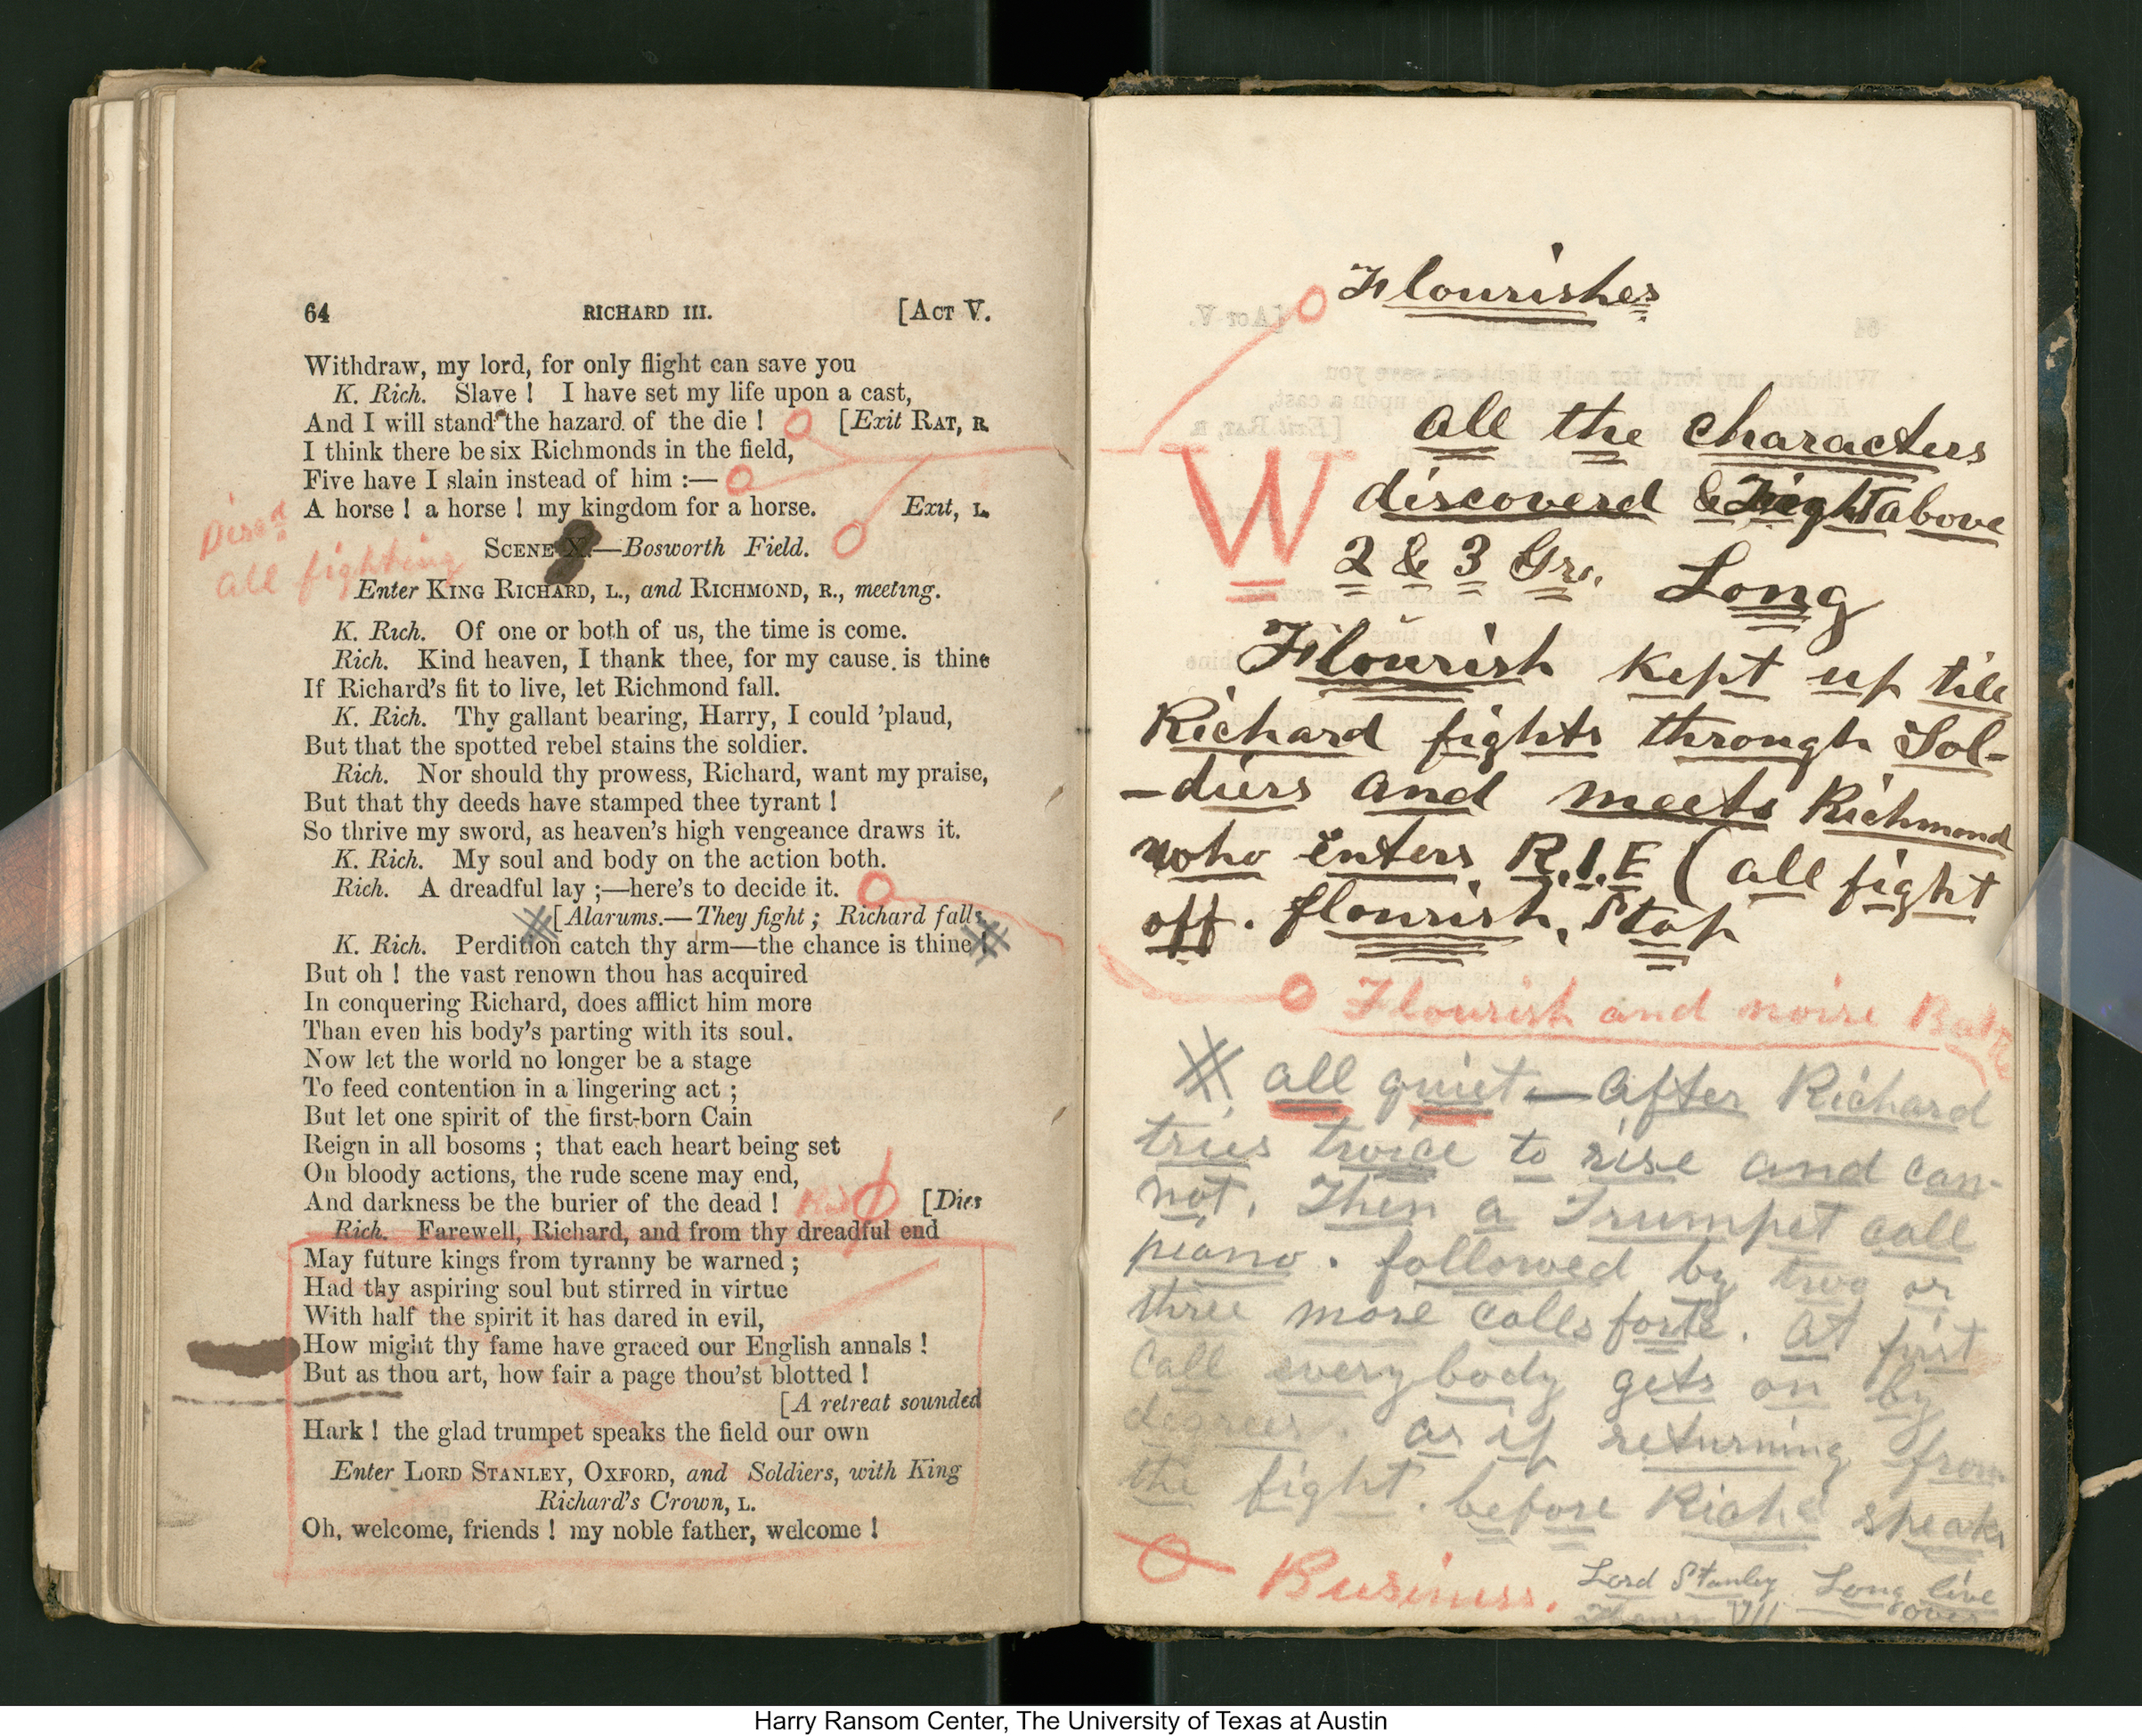 John Wilkes Booth’s promptbook for Richard III, ca. 1861–1864. Manuscripts Collection, Harry Ransom Center. (Harry Ransom Center)